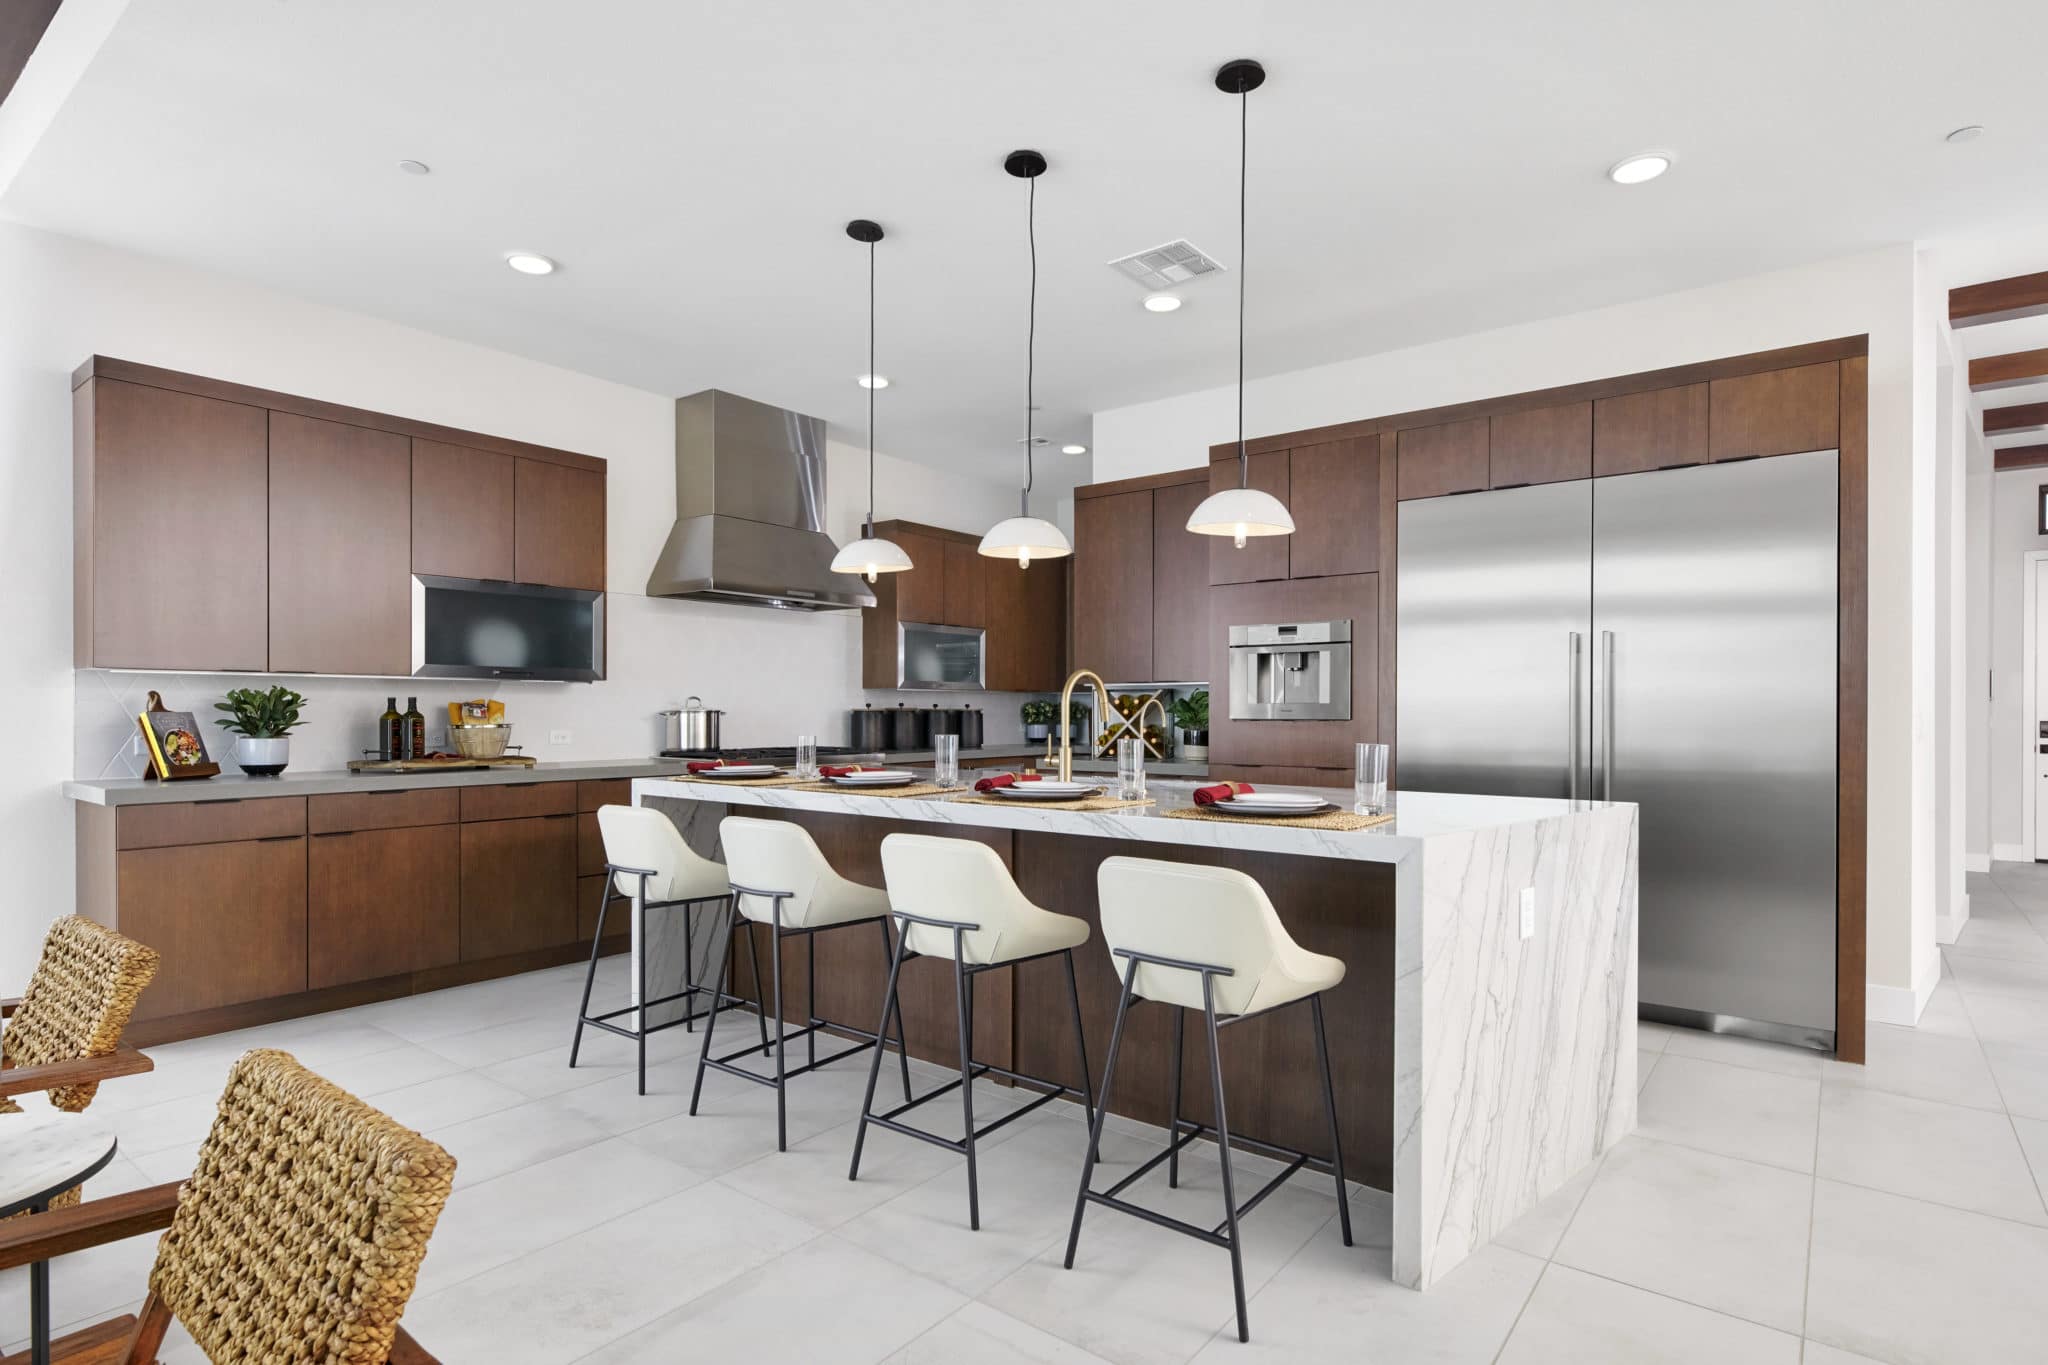 Kitchen of Plan 2 at Overlook by Tri Pointe